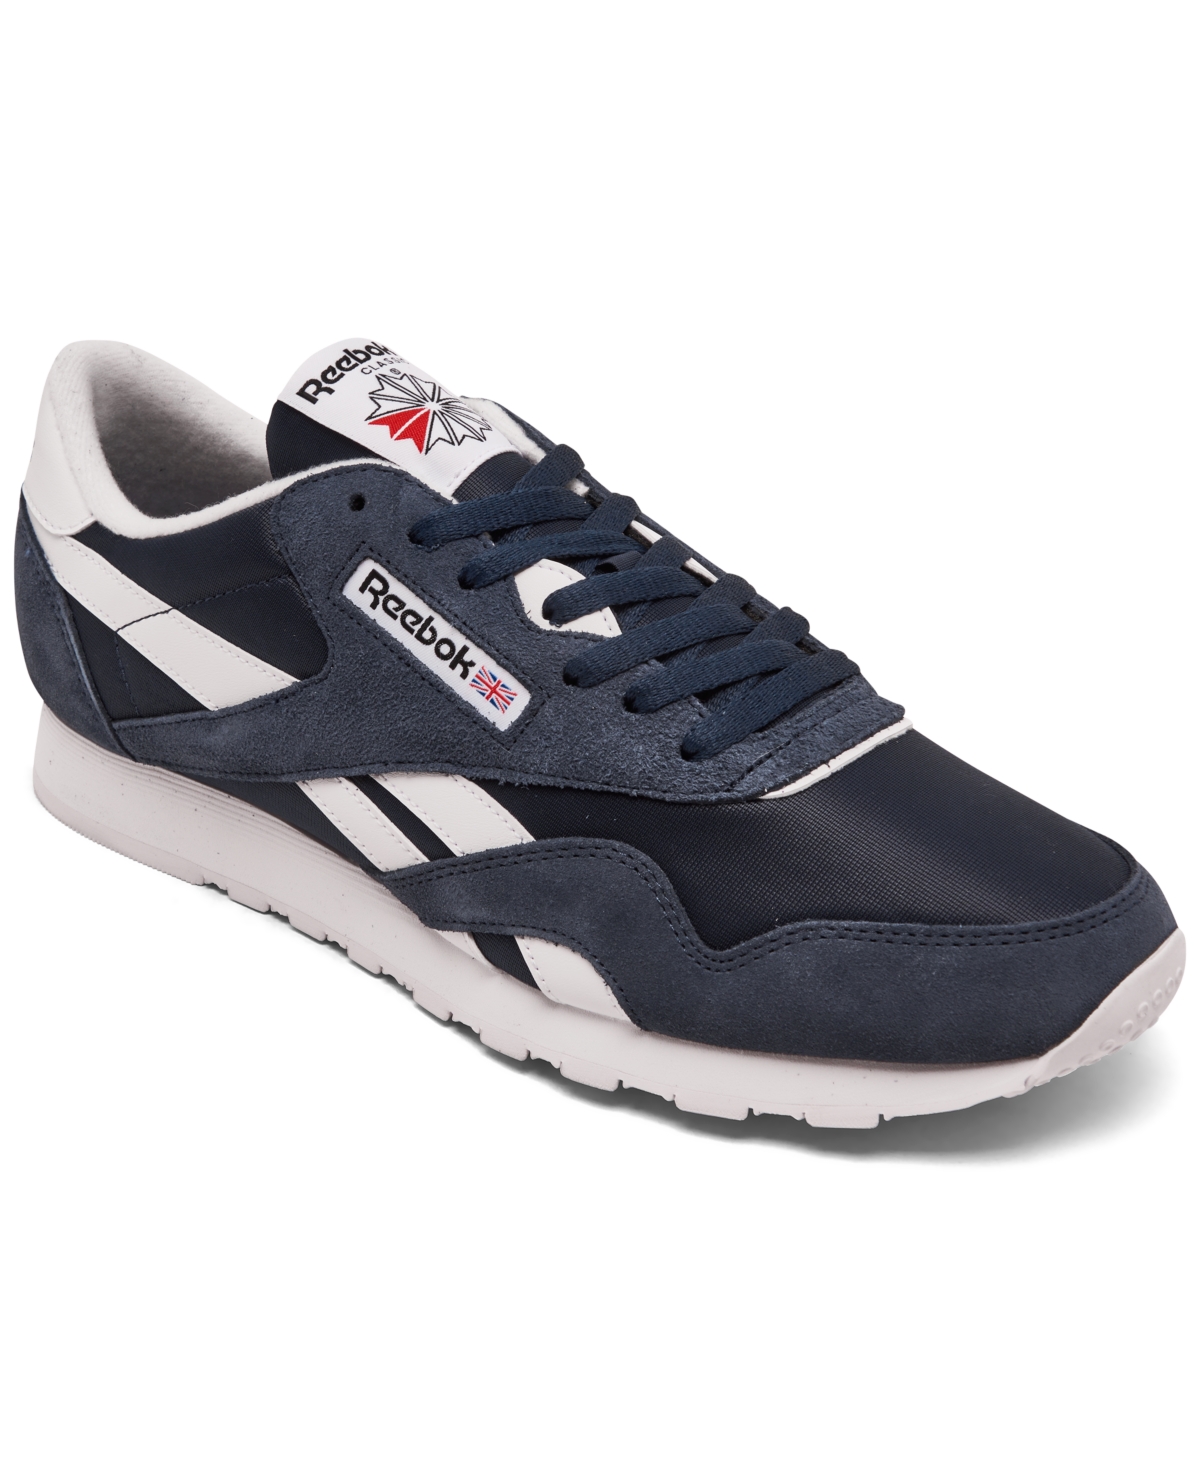 REEBOK MEN'S CLASSIC NYLON CASUAL SNEAKERS FROM FINISH LINE